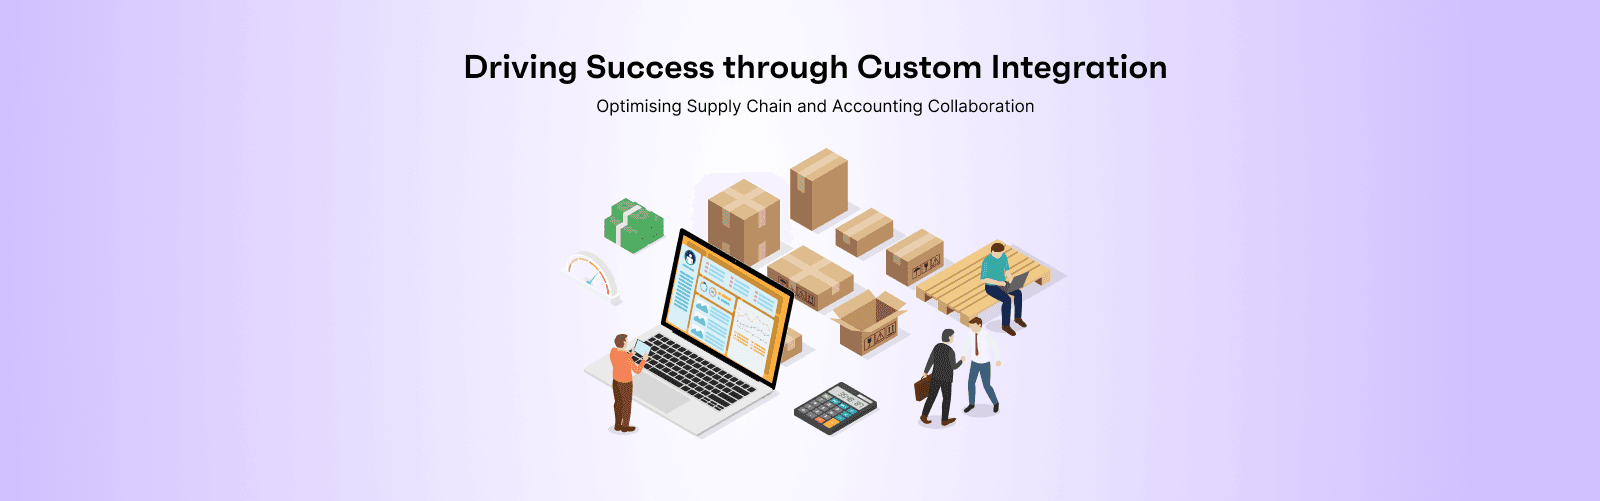 Driving Success through Custom Integration: Optimising Supply Chain and Accounting Collaboration